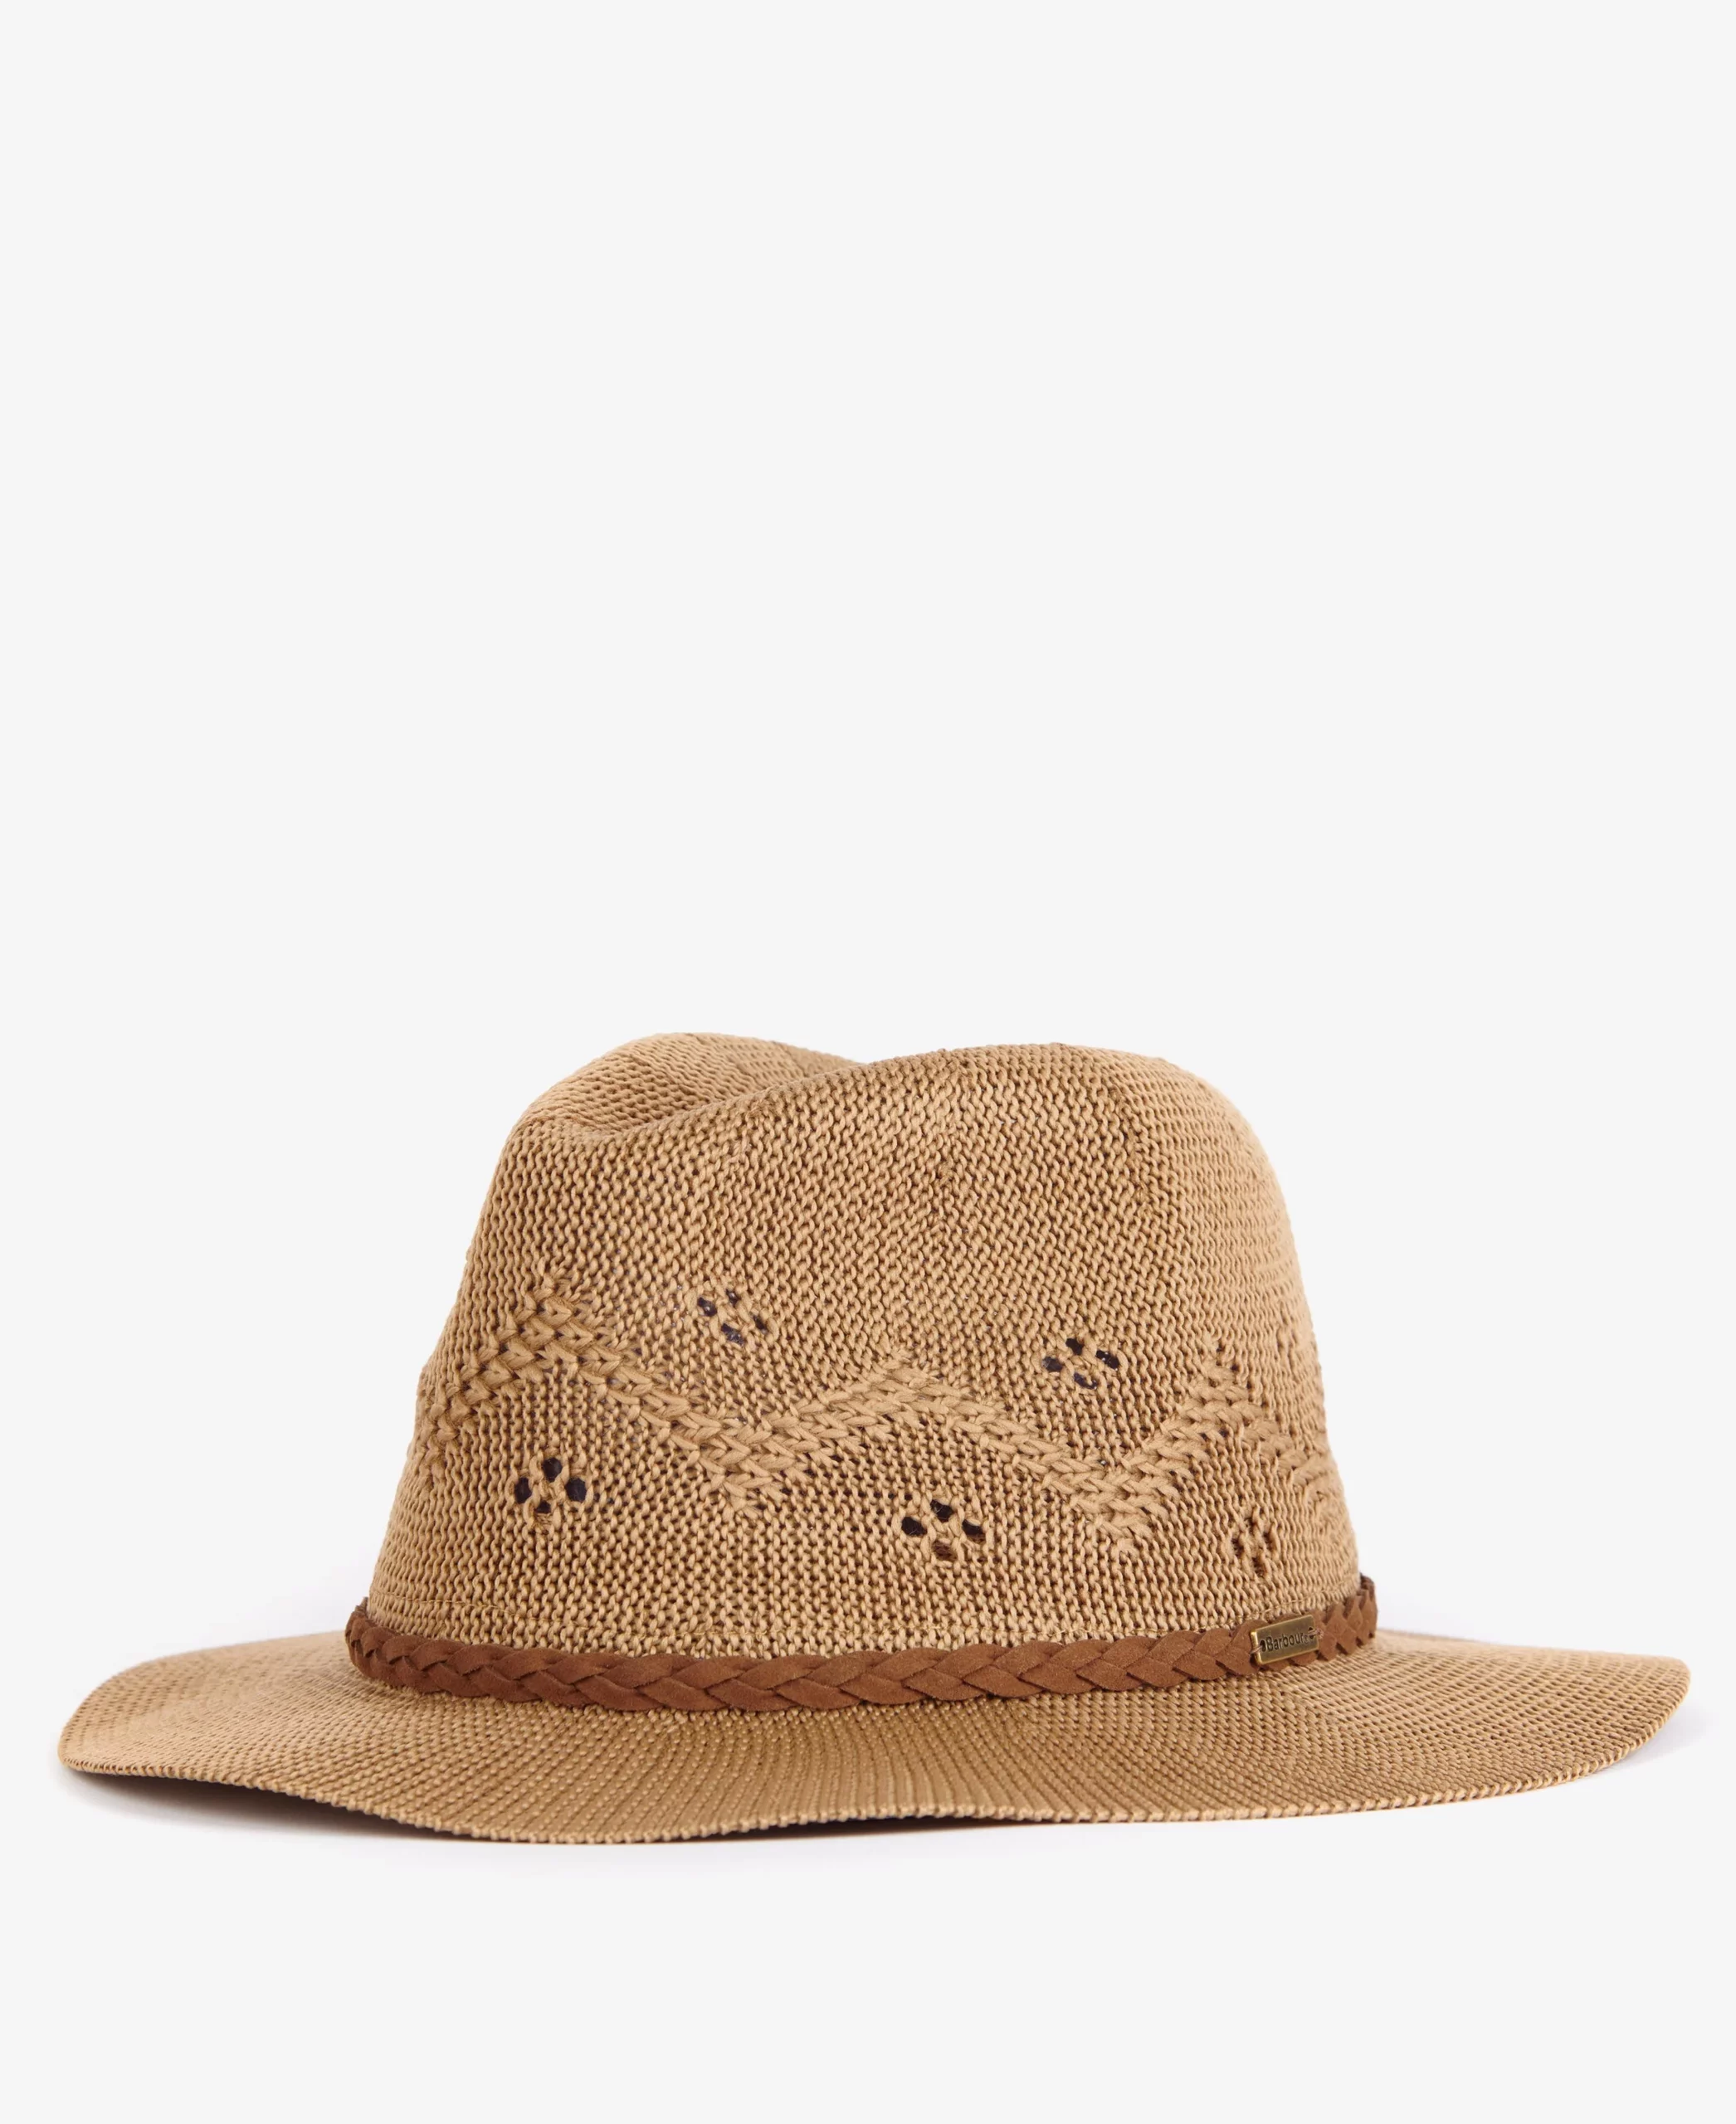 Barbour Flowerdale Trilby Large